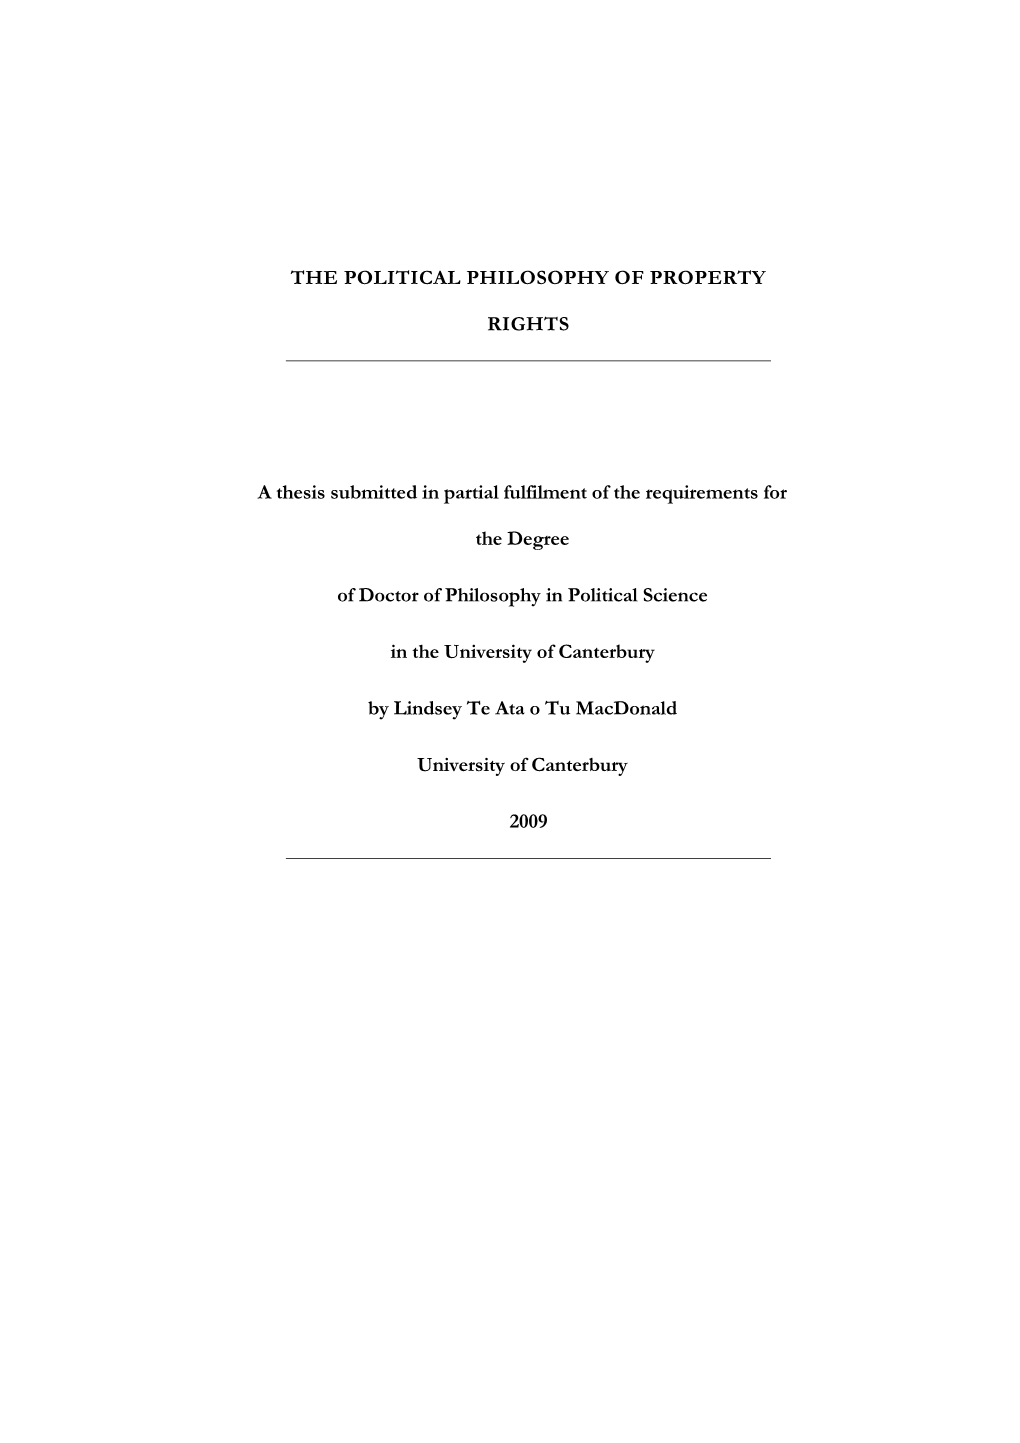 The Political Philosophy of Property Rights, I Am Not Denying That Hohfeld’S Idea of Legal Relations Cannot Be Applied Across Legal Or Even Moral Rights